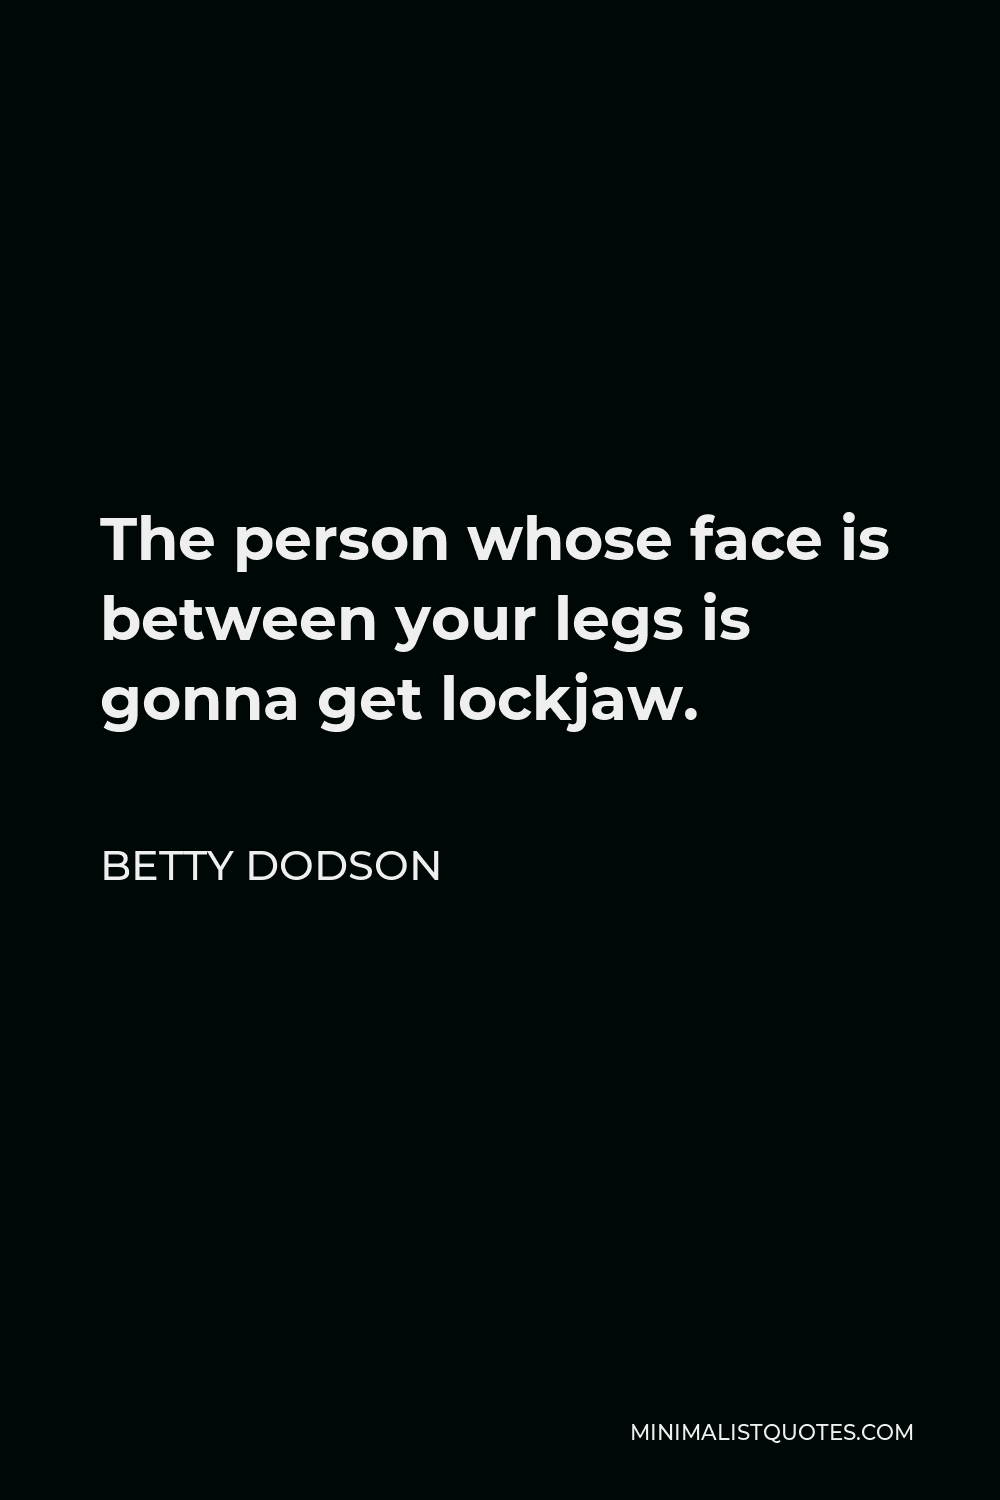 Betty Dodson Quote - The person whose face is between your legs is gonna get lockjaw.